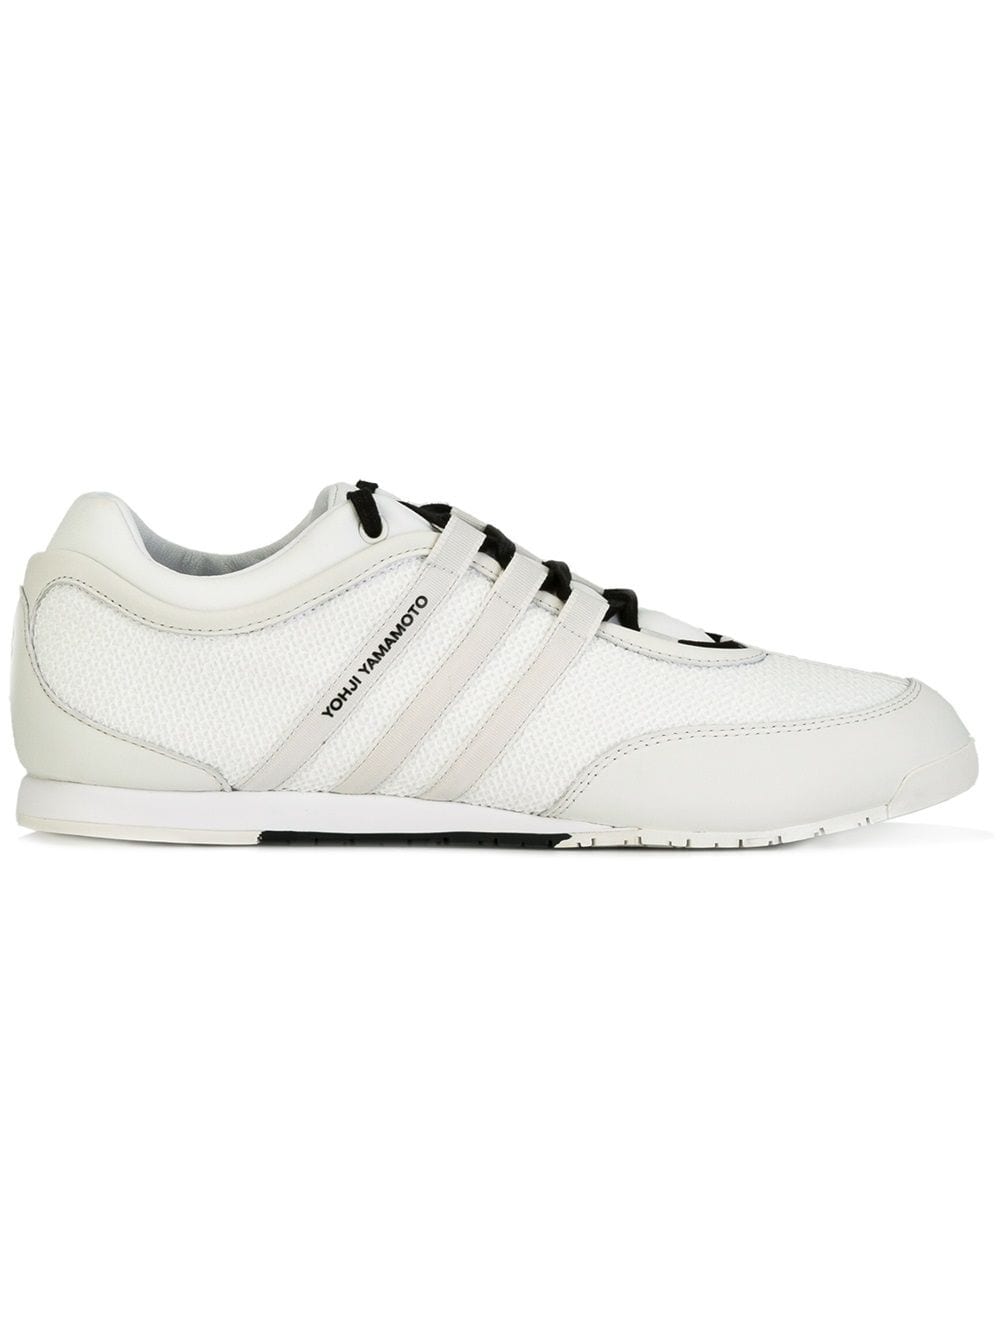 y3 boxing trainers white